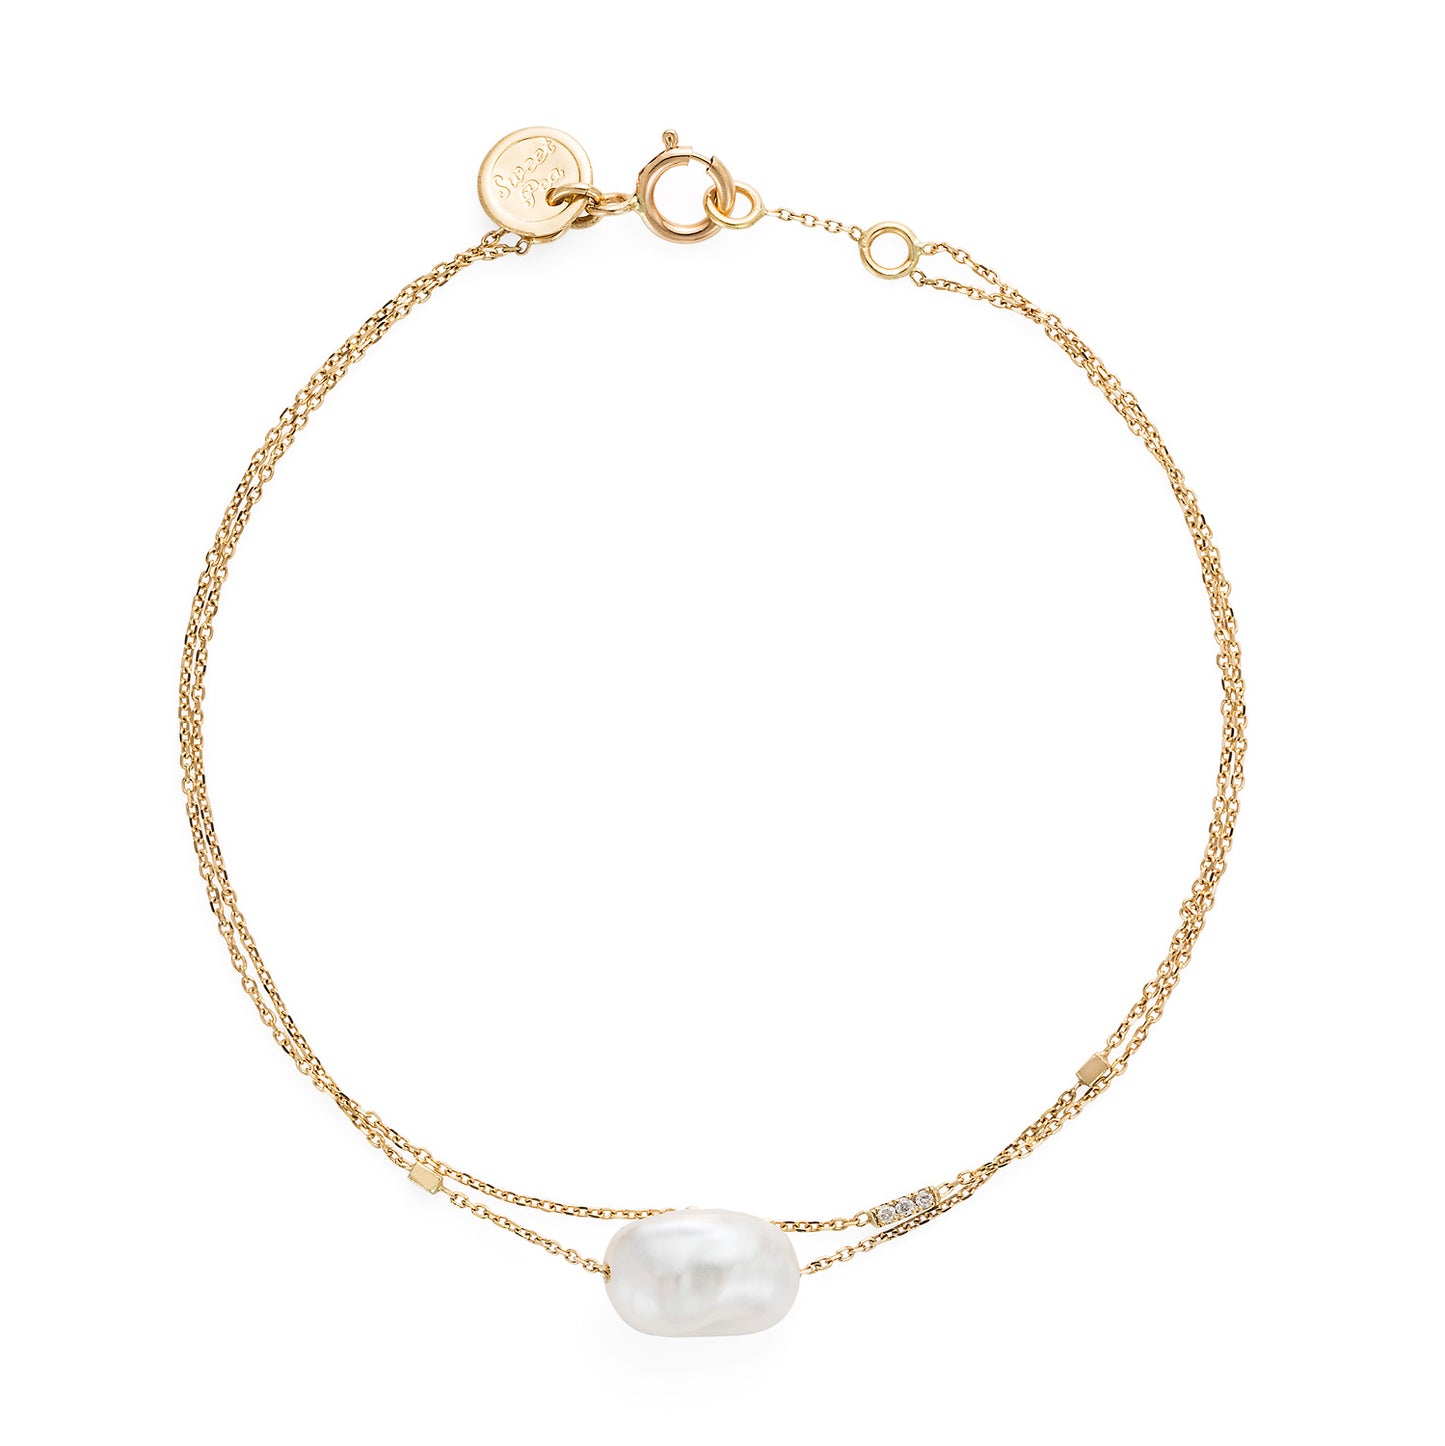 18ct yellow gold fine chain 2 strand bracelet with small bars, Diamond set bar and Keshi Pearls